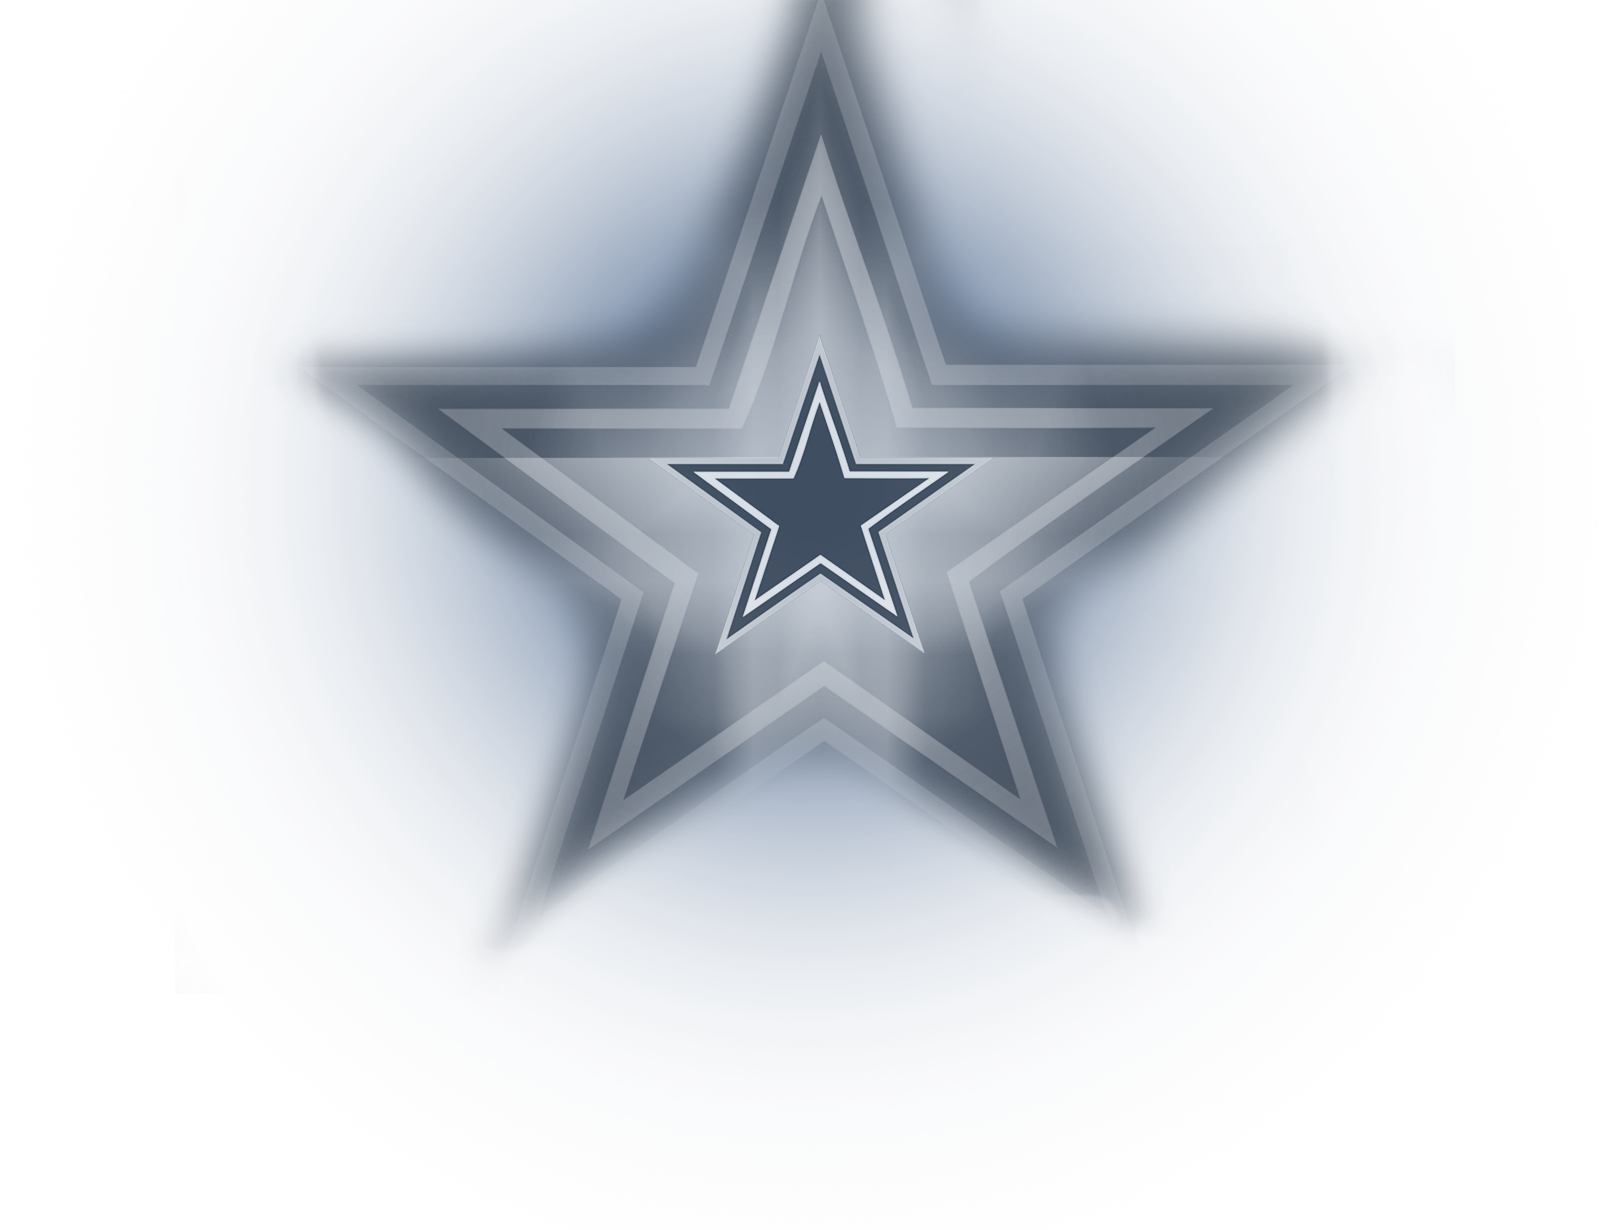 Dallas Cowboys Star PNG Picture